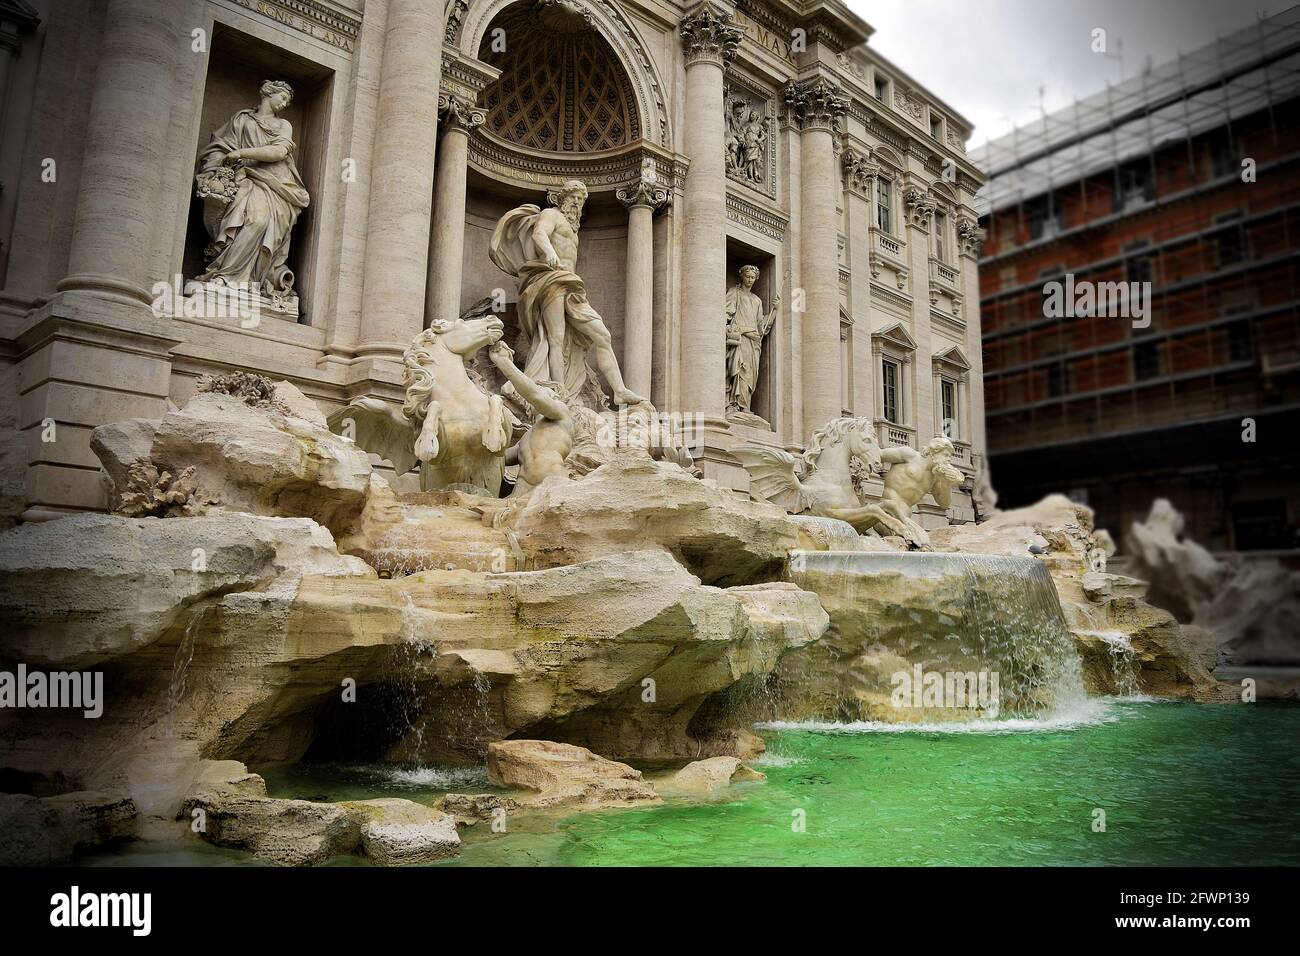 ROME, ITALY - Feb 07, 2016: The sculpture, statues and architecture of the Trevi Fountain in the capital city of Rome, Italy on a winter and cloudy da Stock Photo